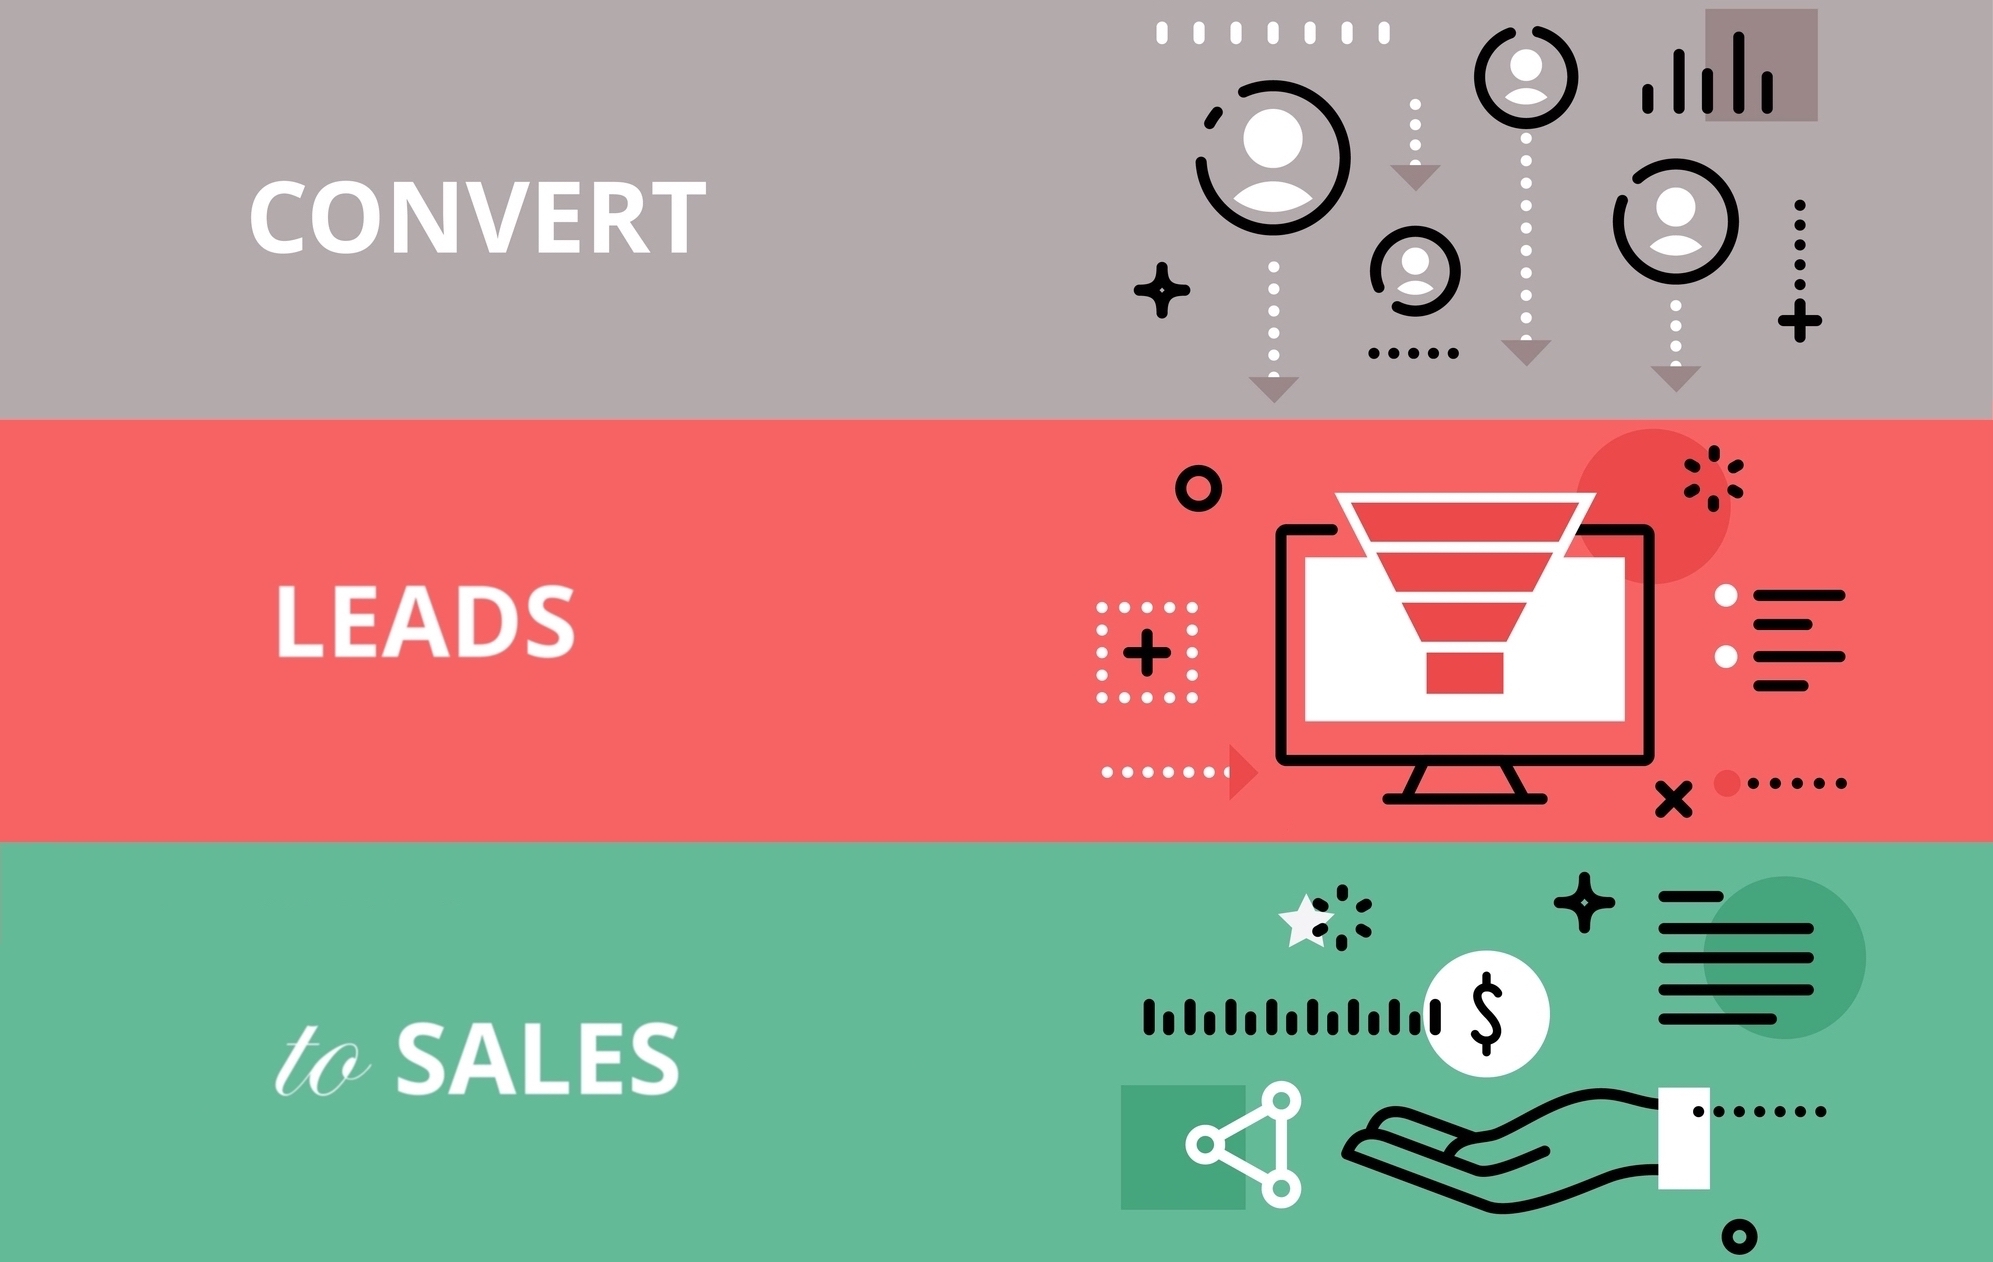 Best Way To Convert Leads